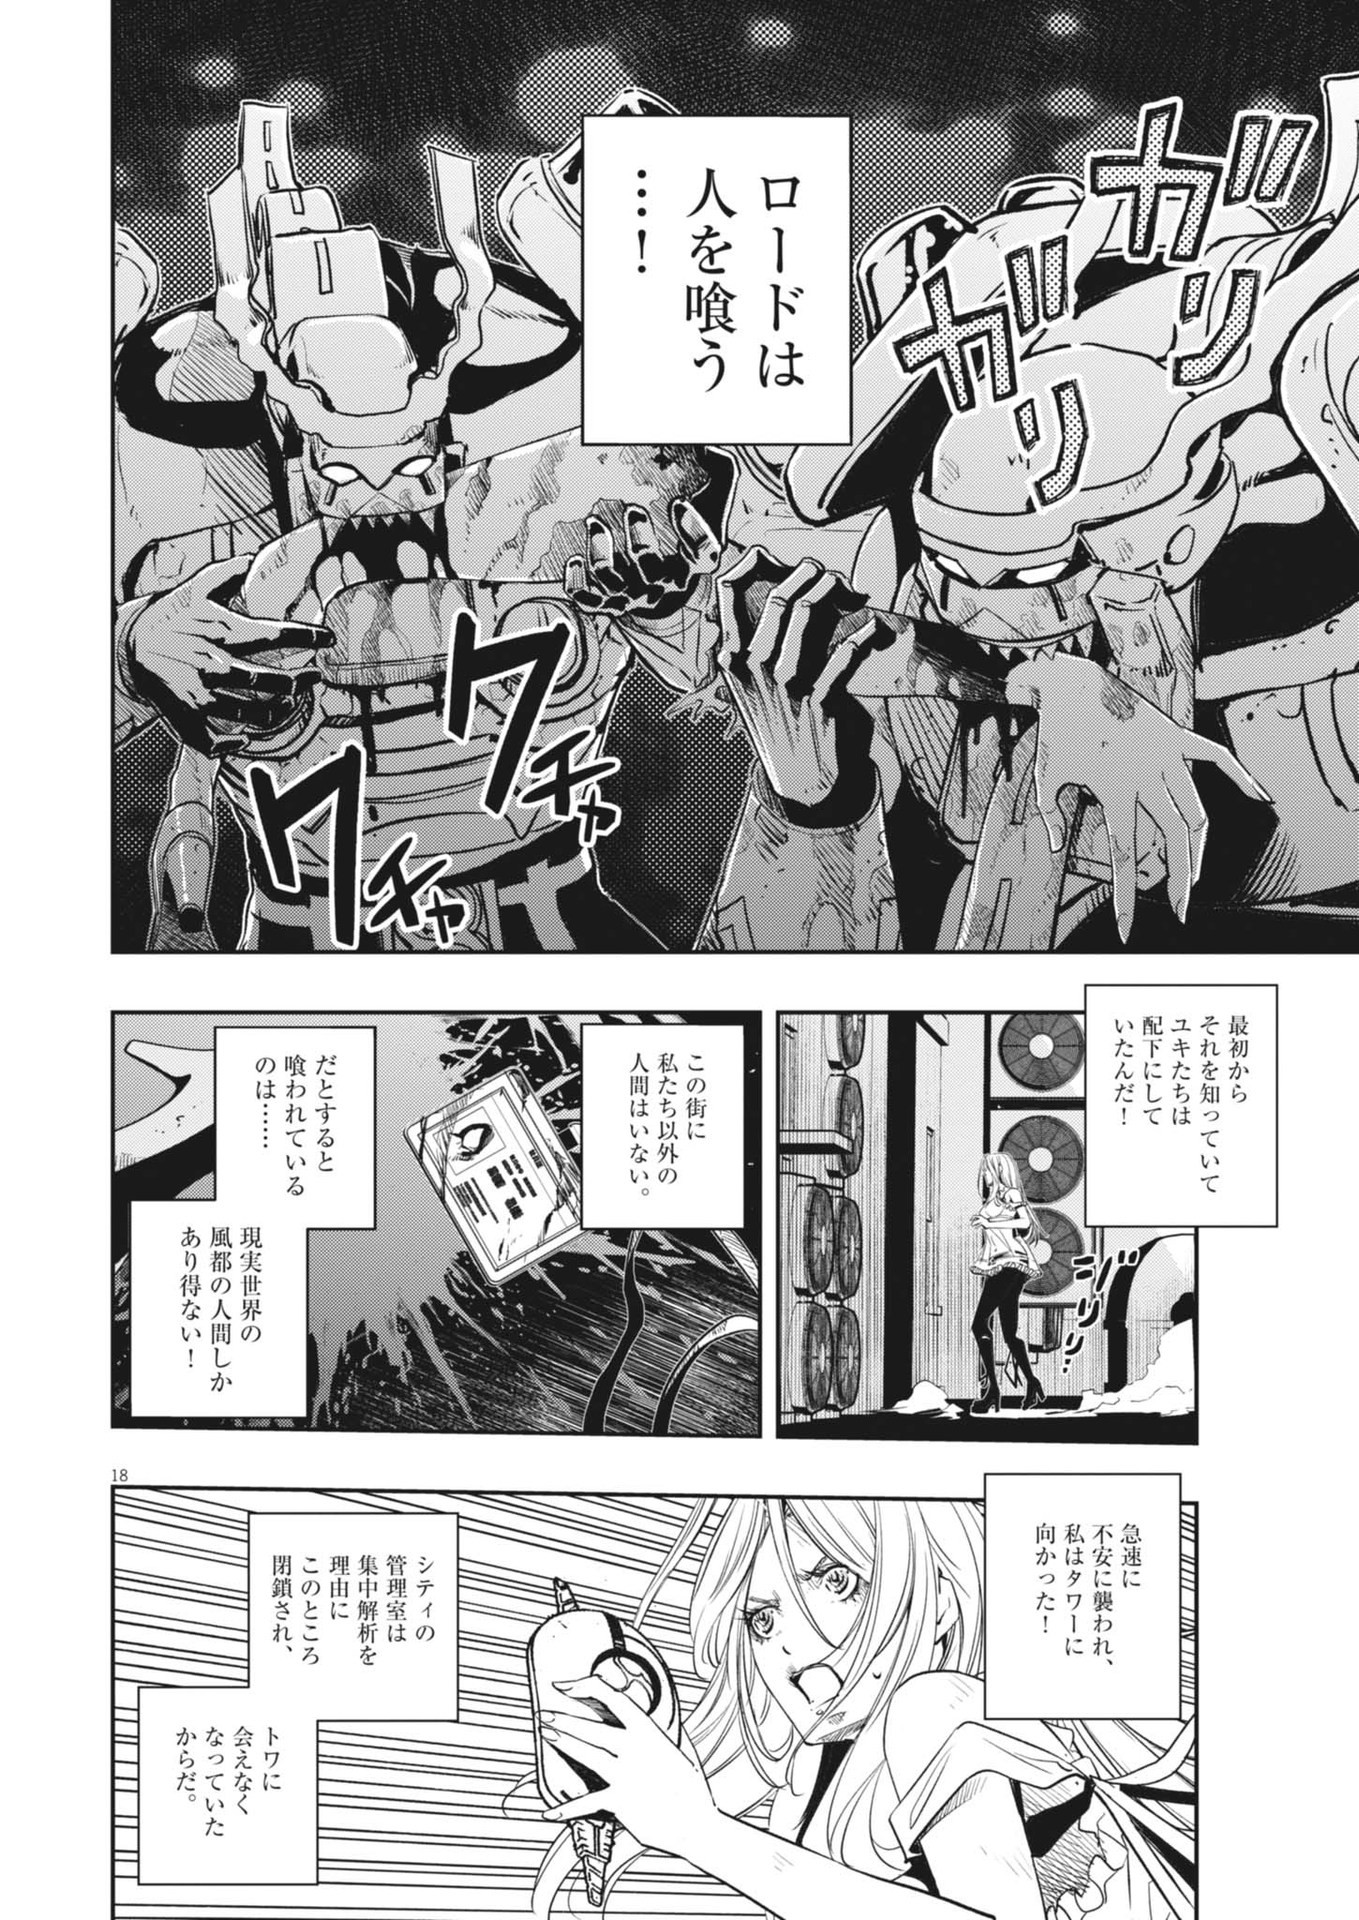 Kamen Rider W: Fuuto Tantei - Chapter 149 - Page 18